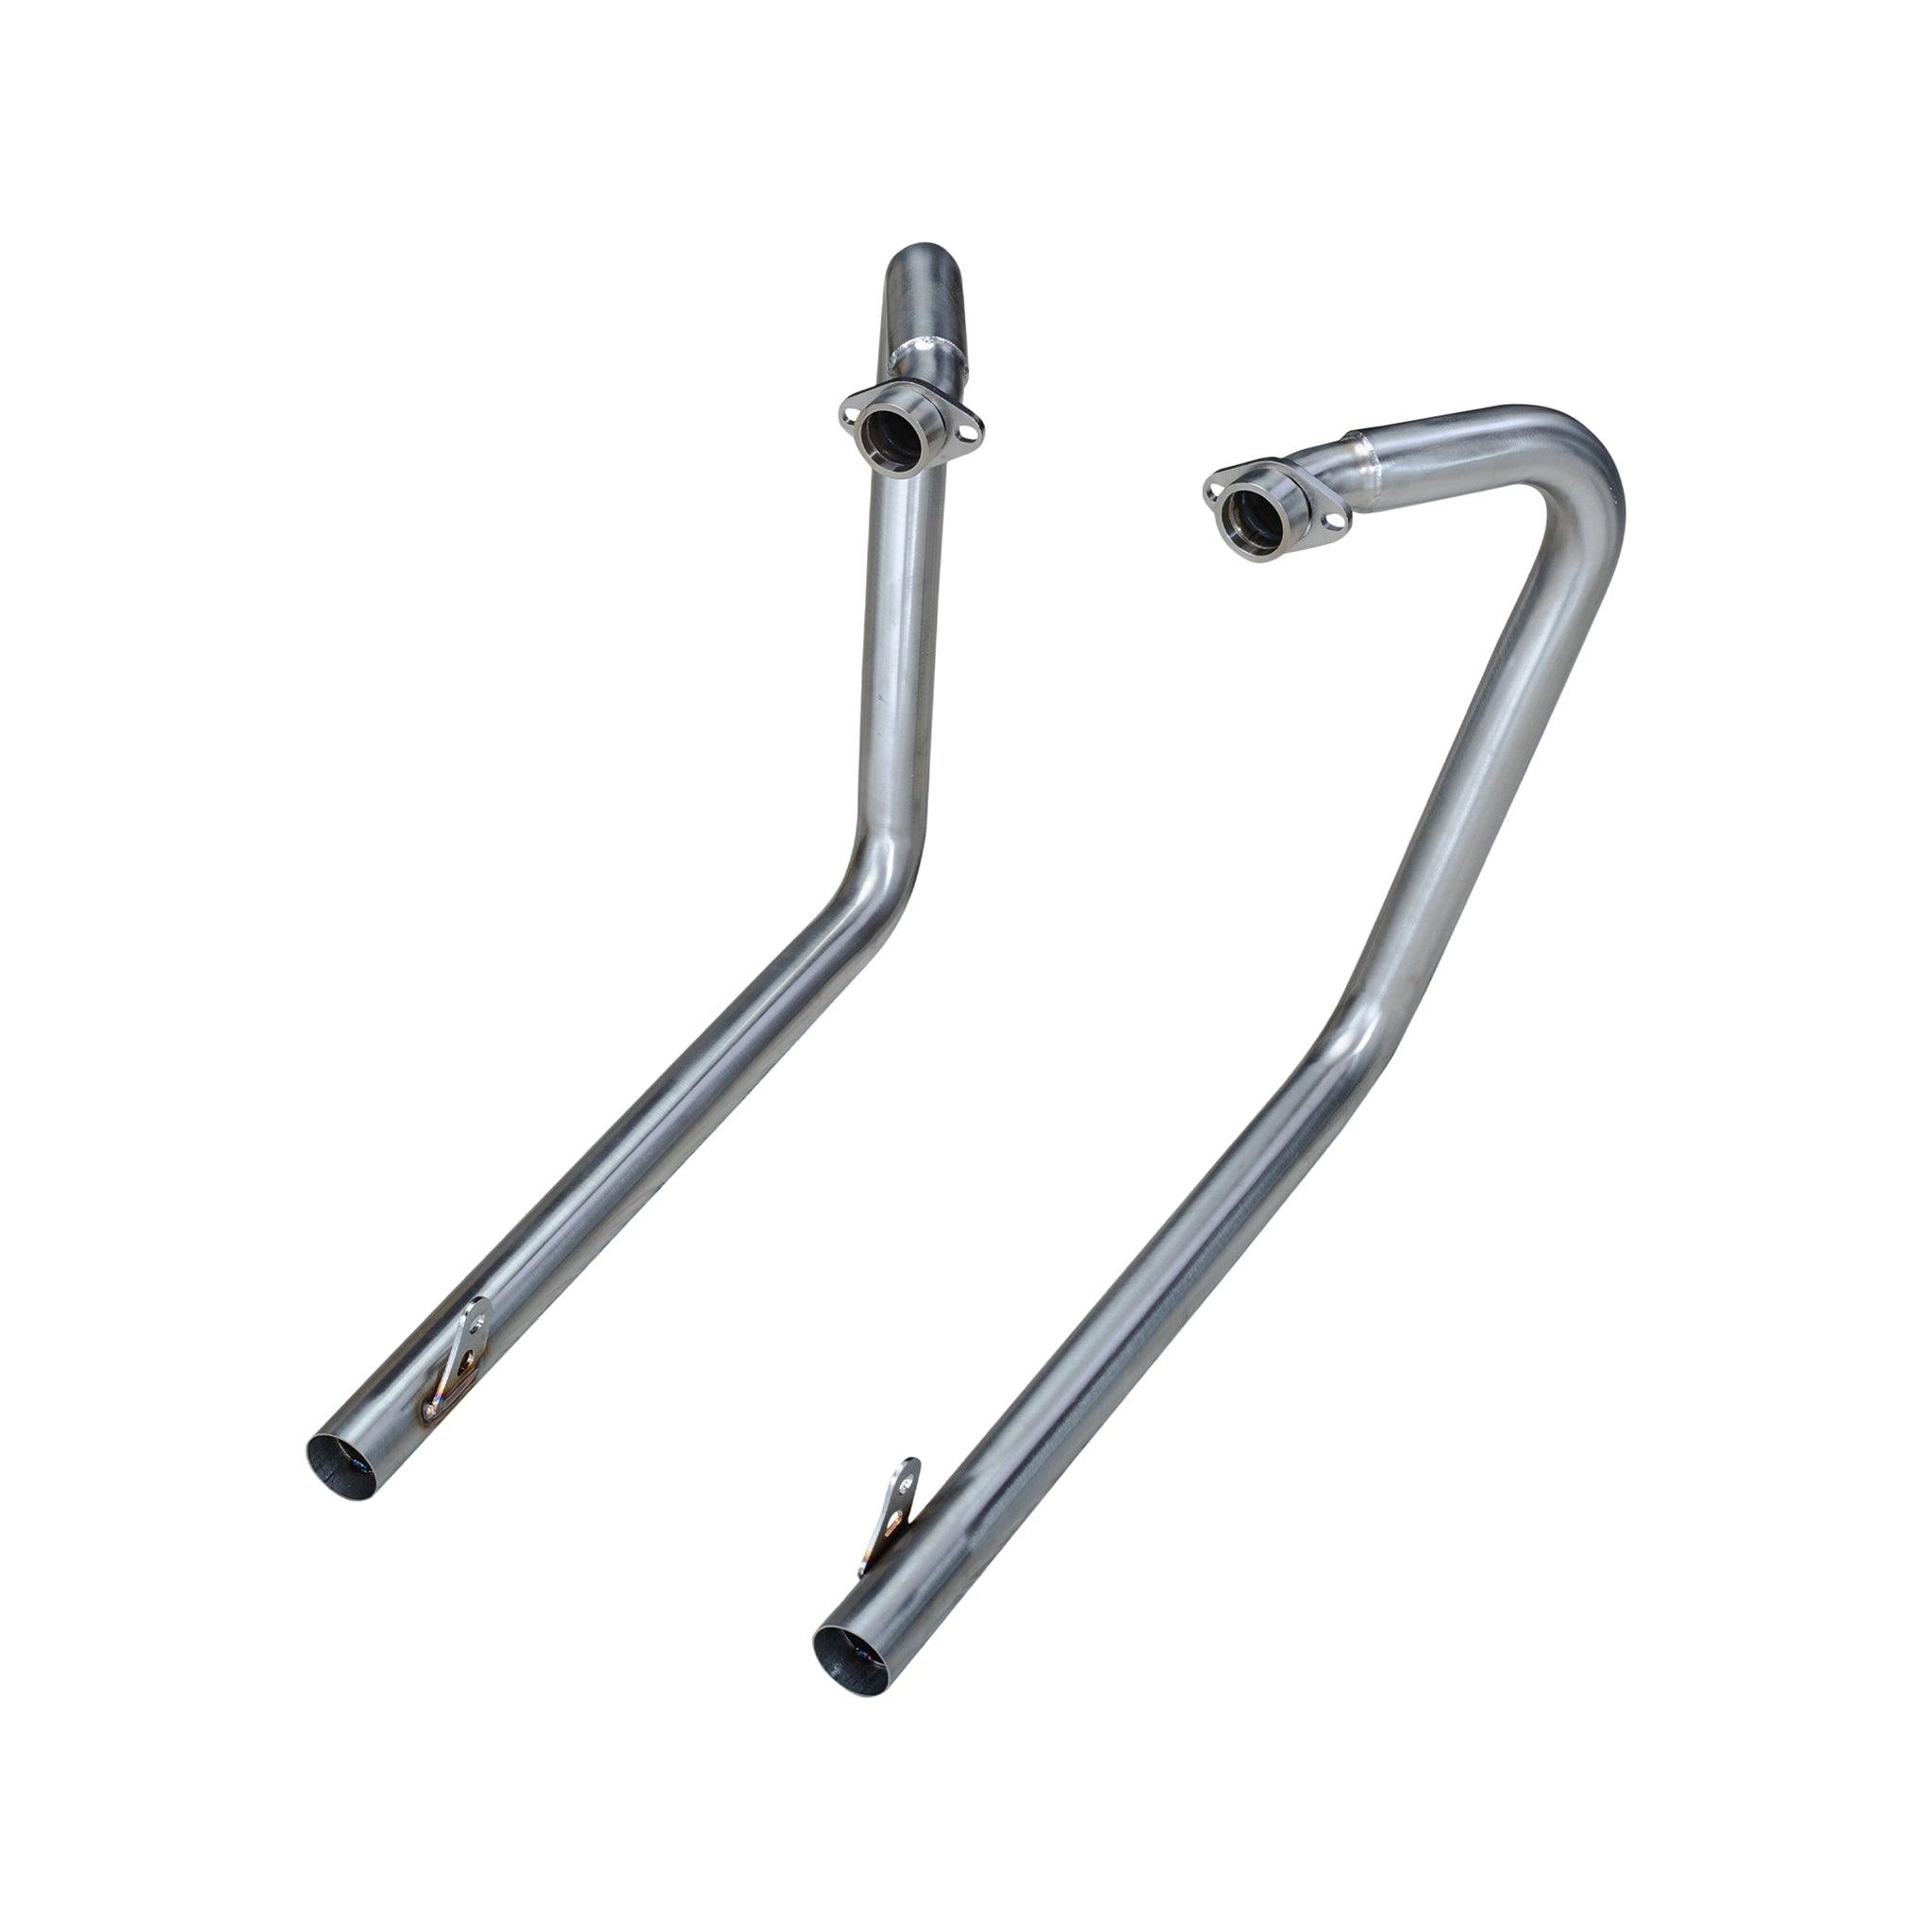 2-2 Drag Pipe Exhaust for Triumph Motorcycles - British Customs